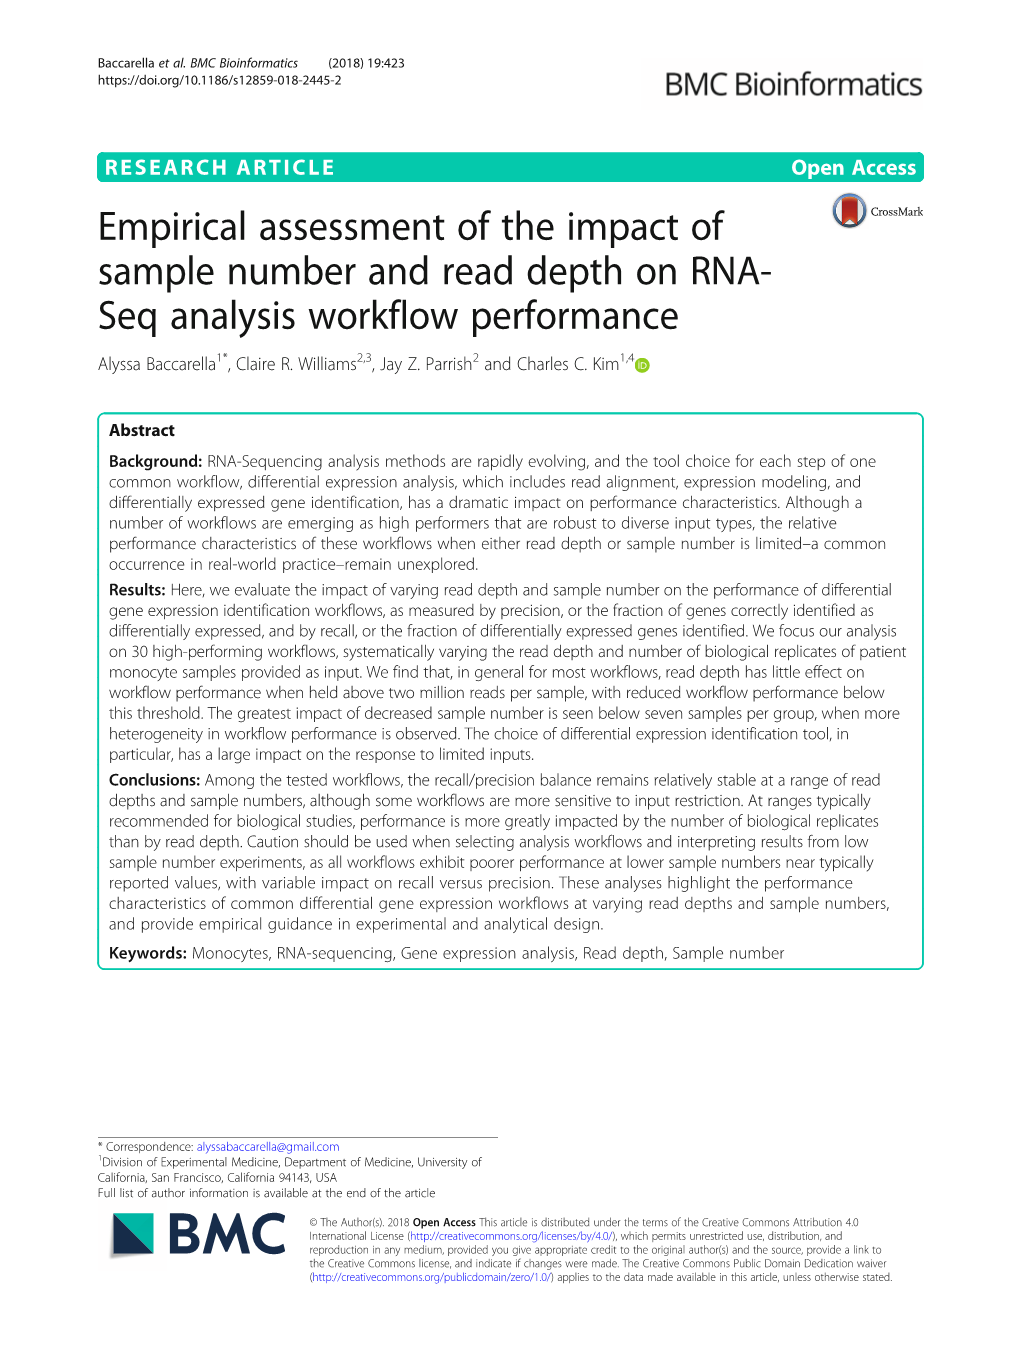 Empirical Assessment of the Impact of Sample Number and Read Depth on RNA-Seq Analysis Workflow Performance